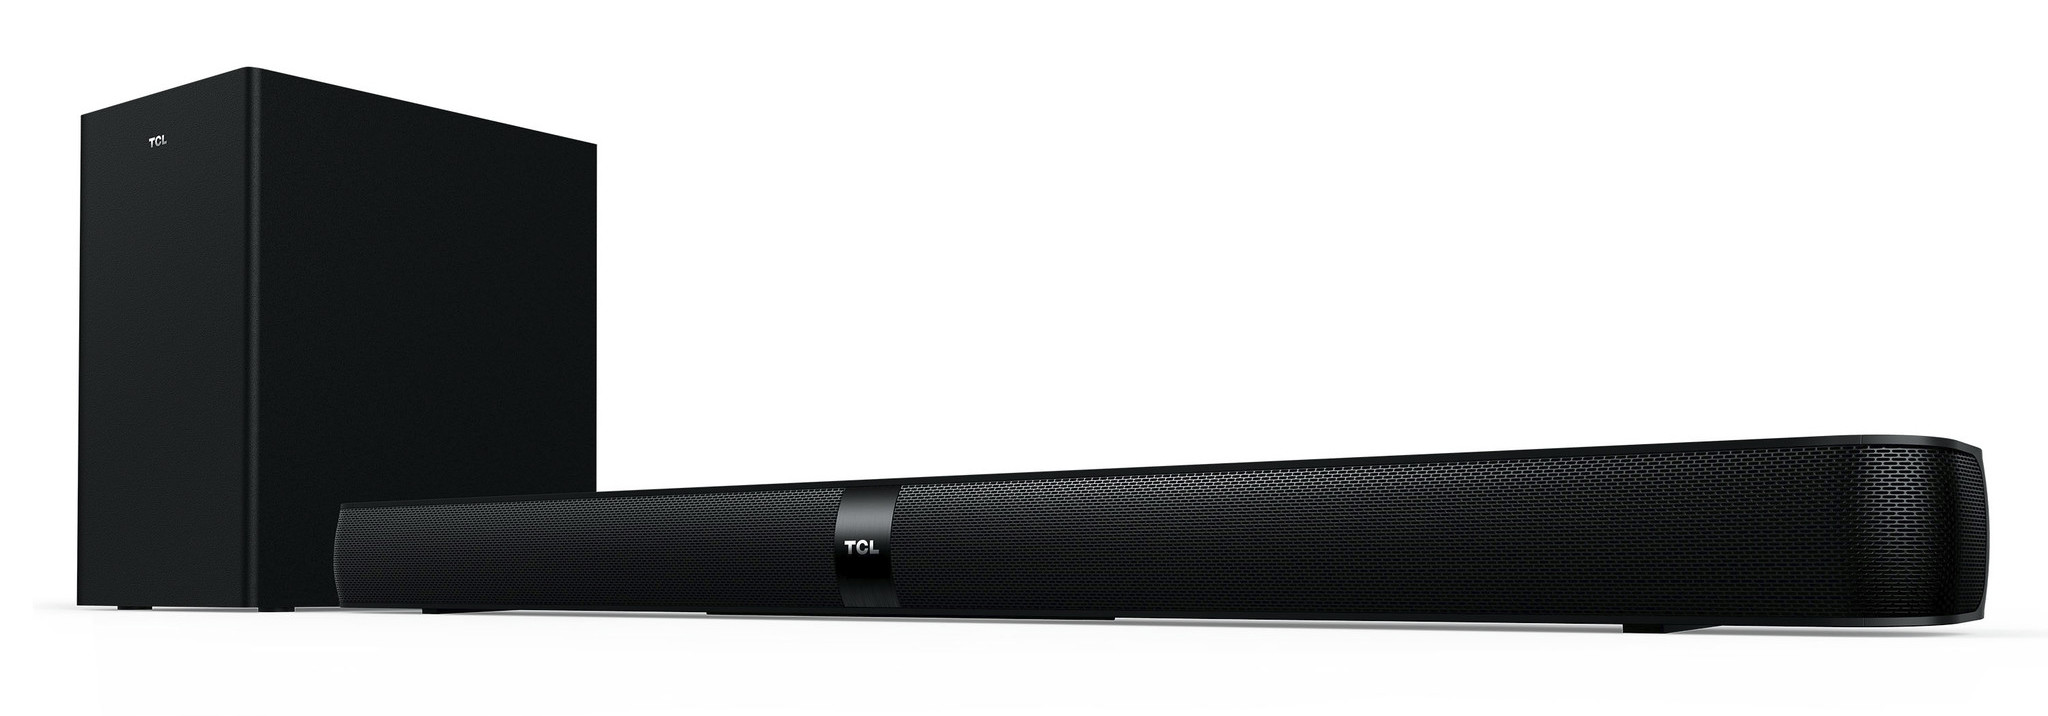 TCL Releases a New Set of Sound Bars Built For TCL Roku TVs